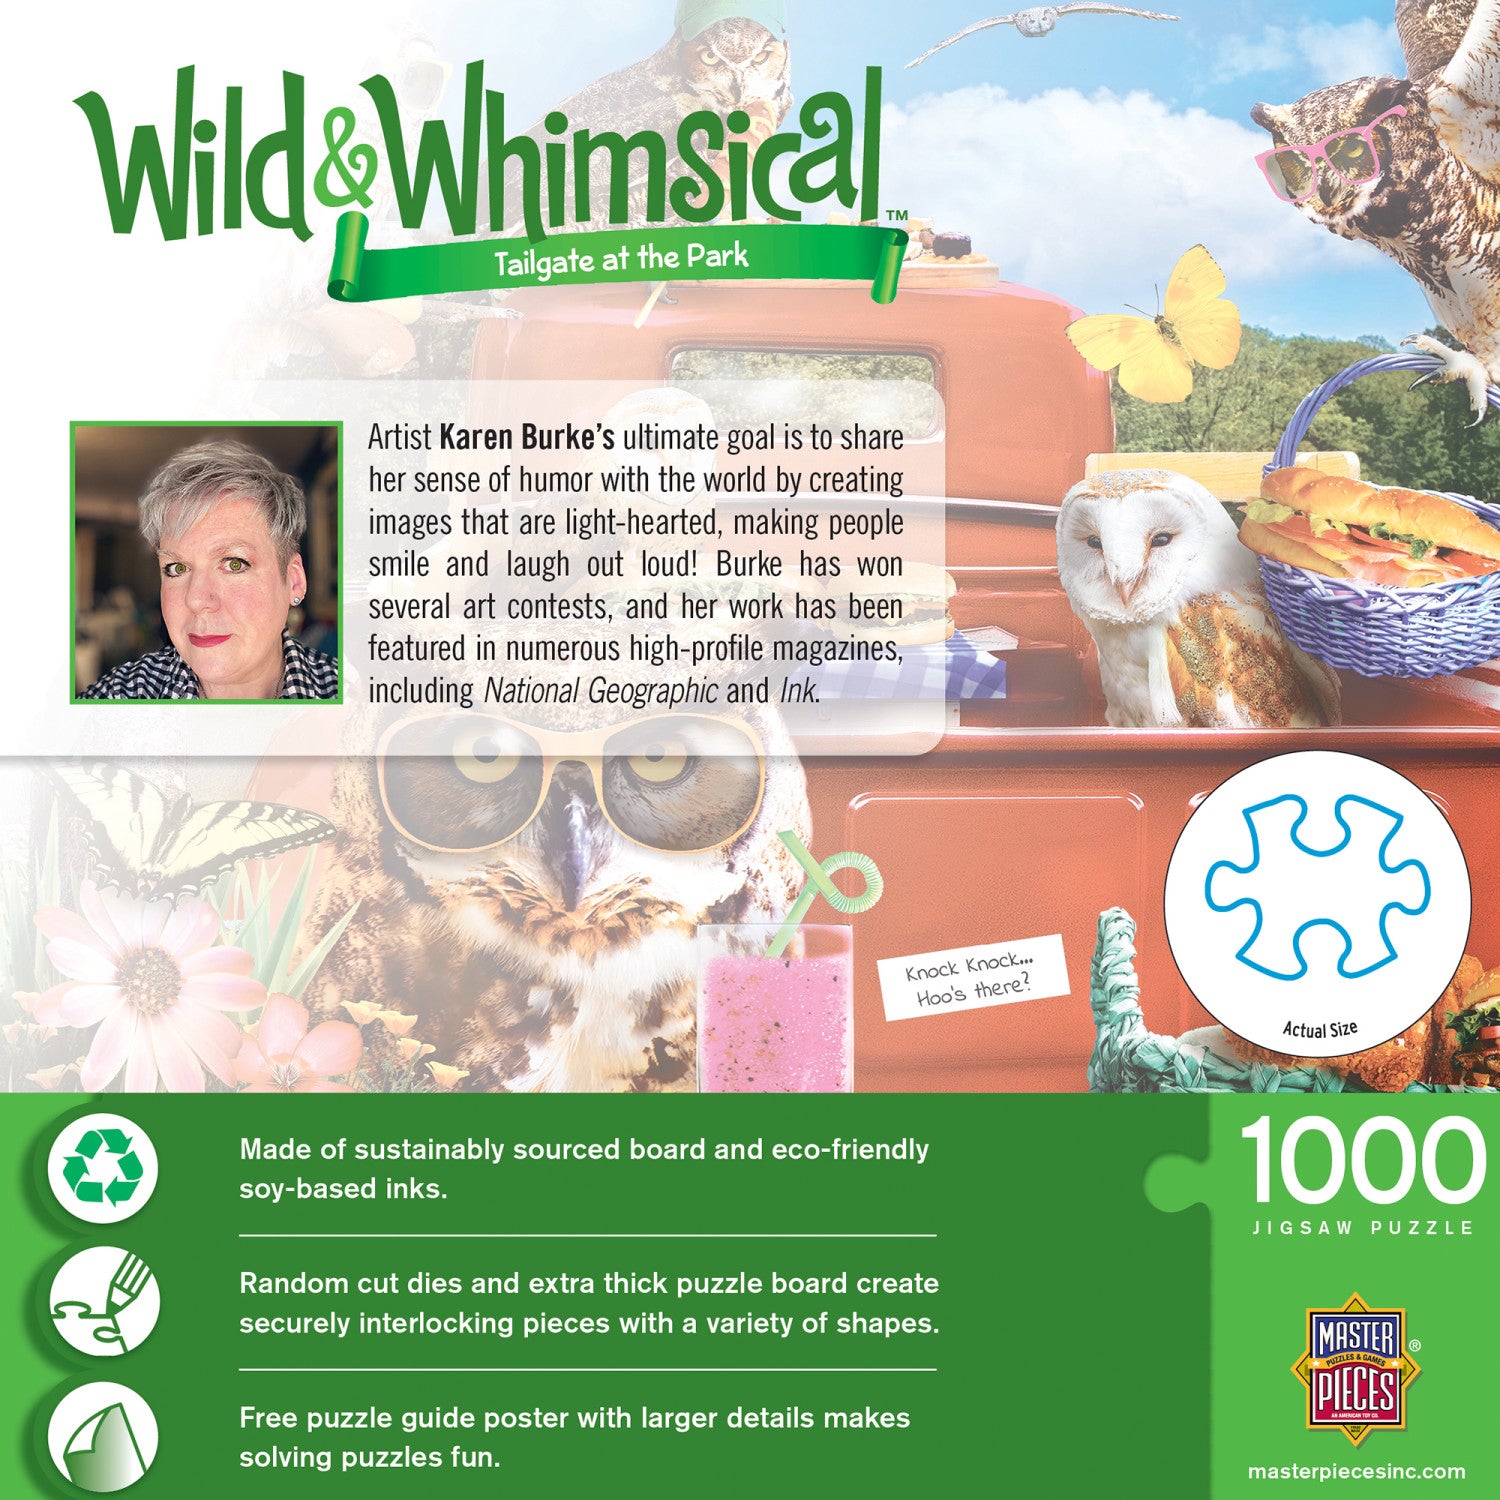 Wild & Whimsical - Tailgate at the Park 1000 Piece Puzzle